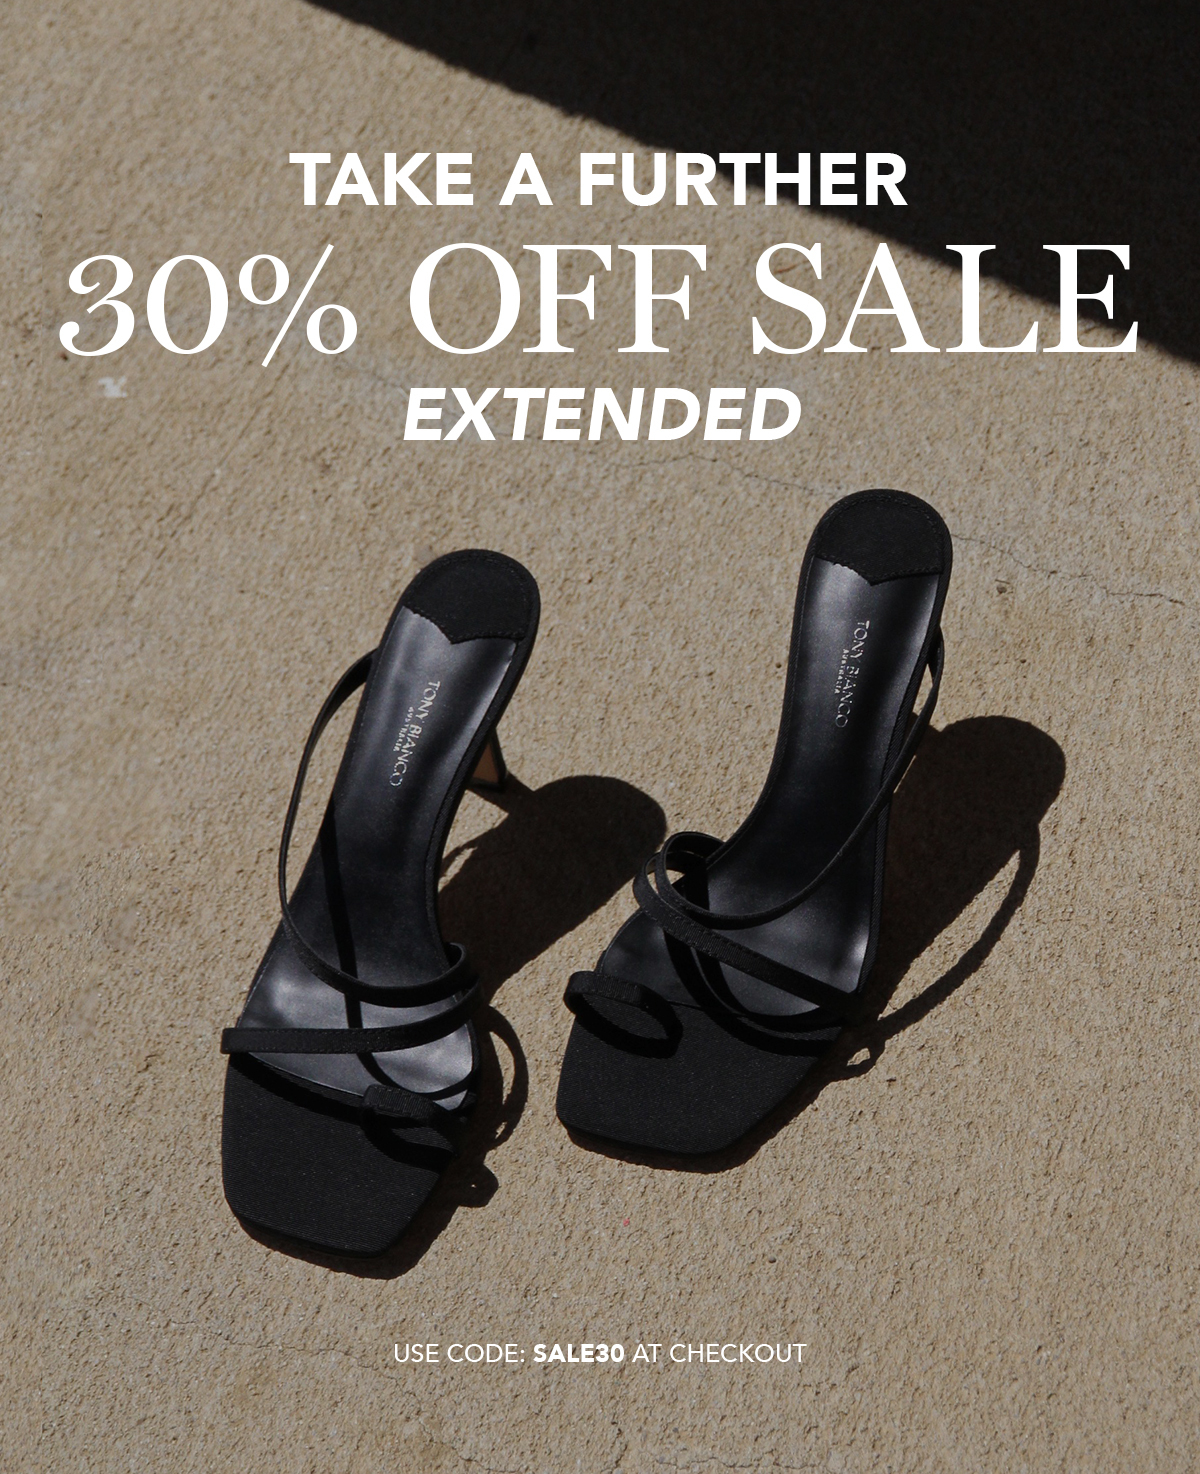 Take a further 30% off all sale items. Code: SALE30. Afterpay available